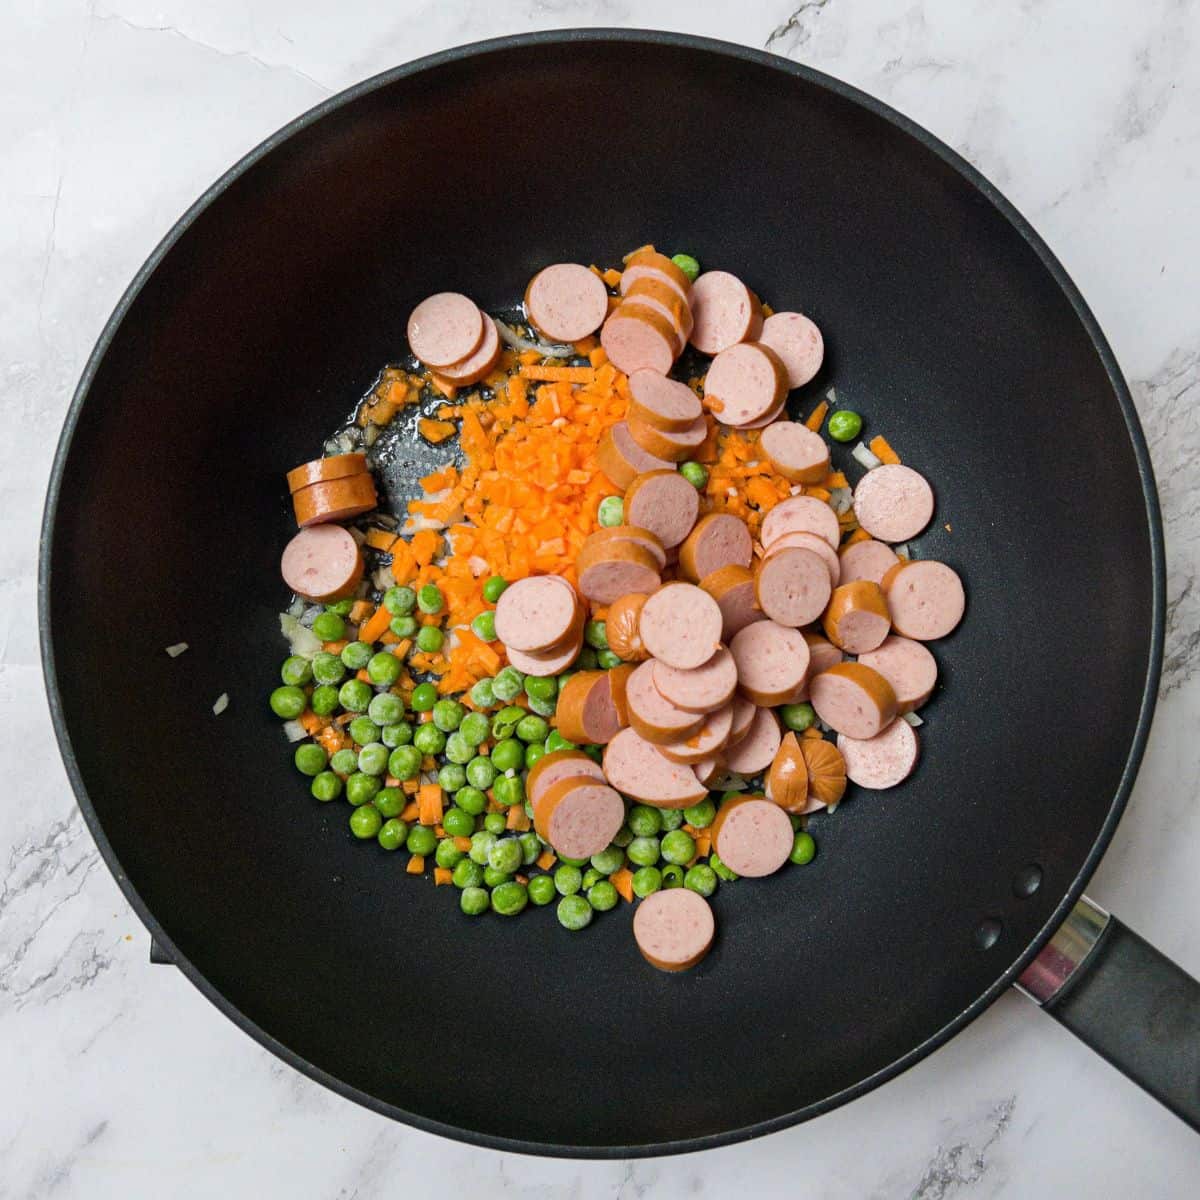 Hot dog slices, peas and carrots in a wok.